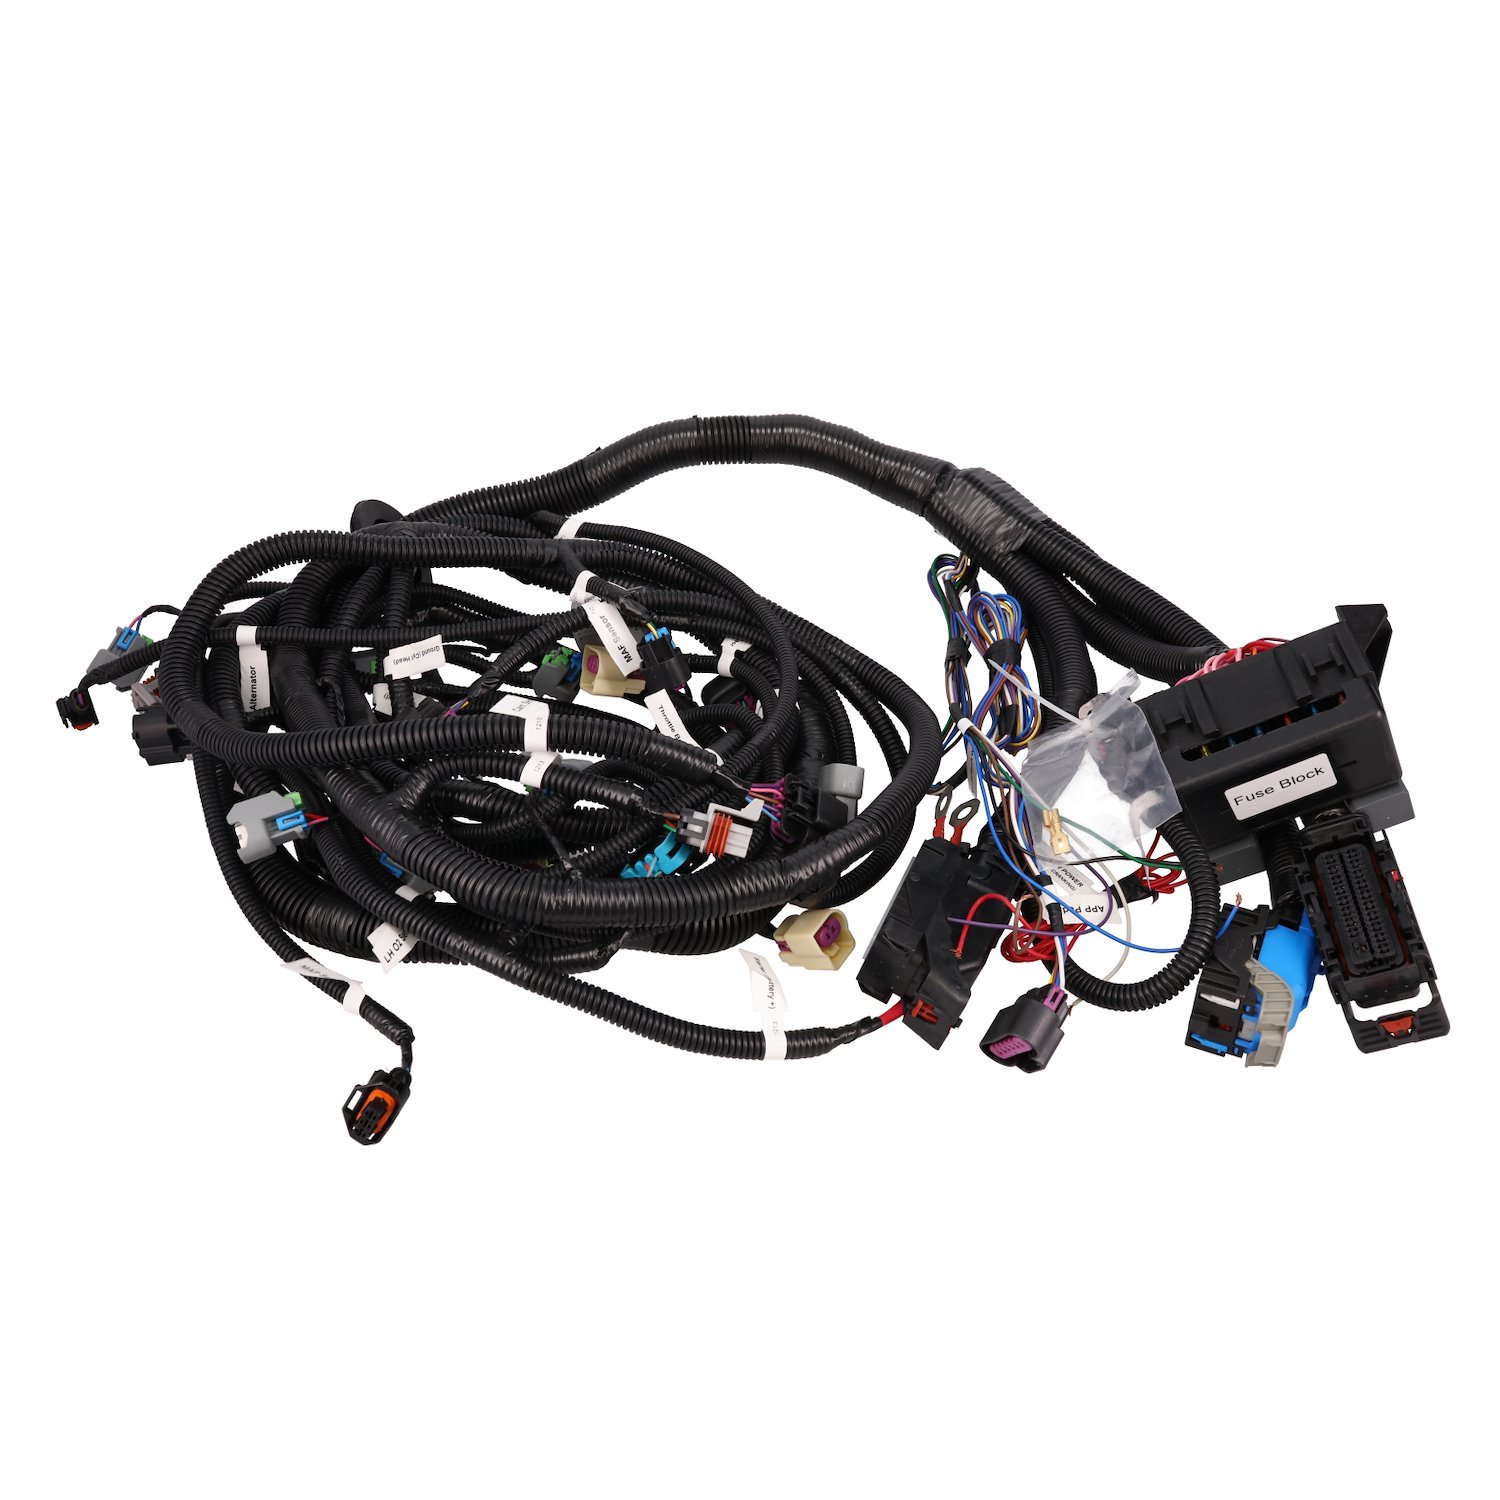 WH1213 Standalone Wiring Harness, LH6, LY5, LMG, LH8 Drive by Cable w/ 13-pin 4L60E